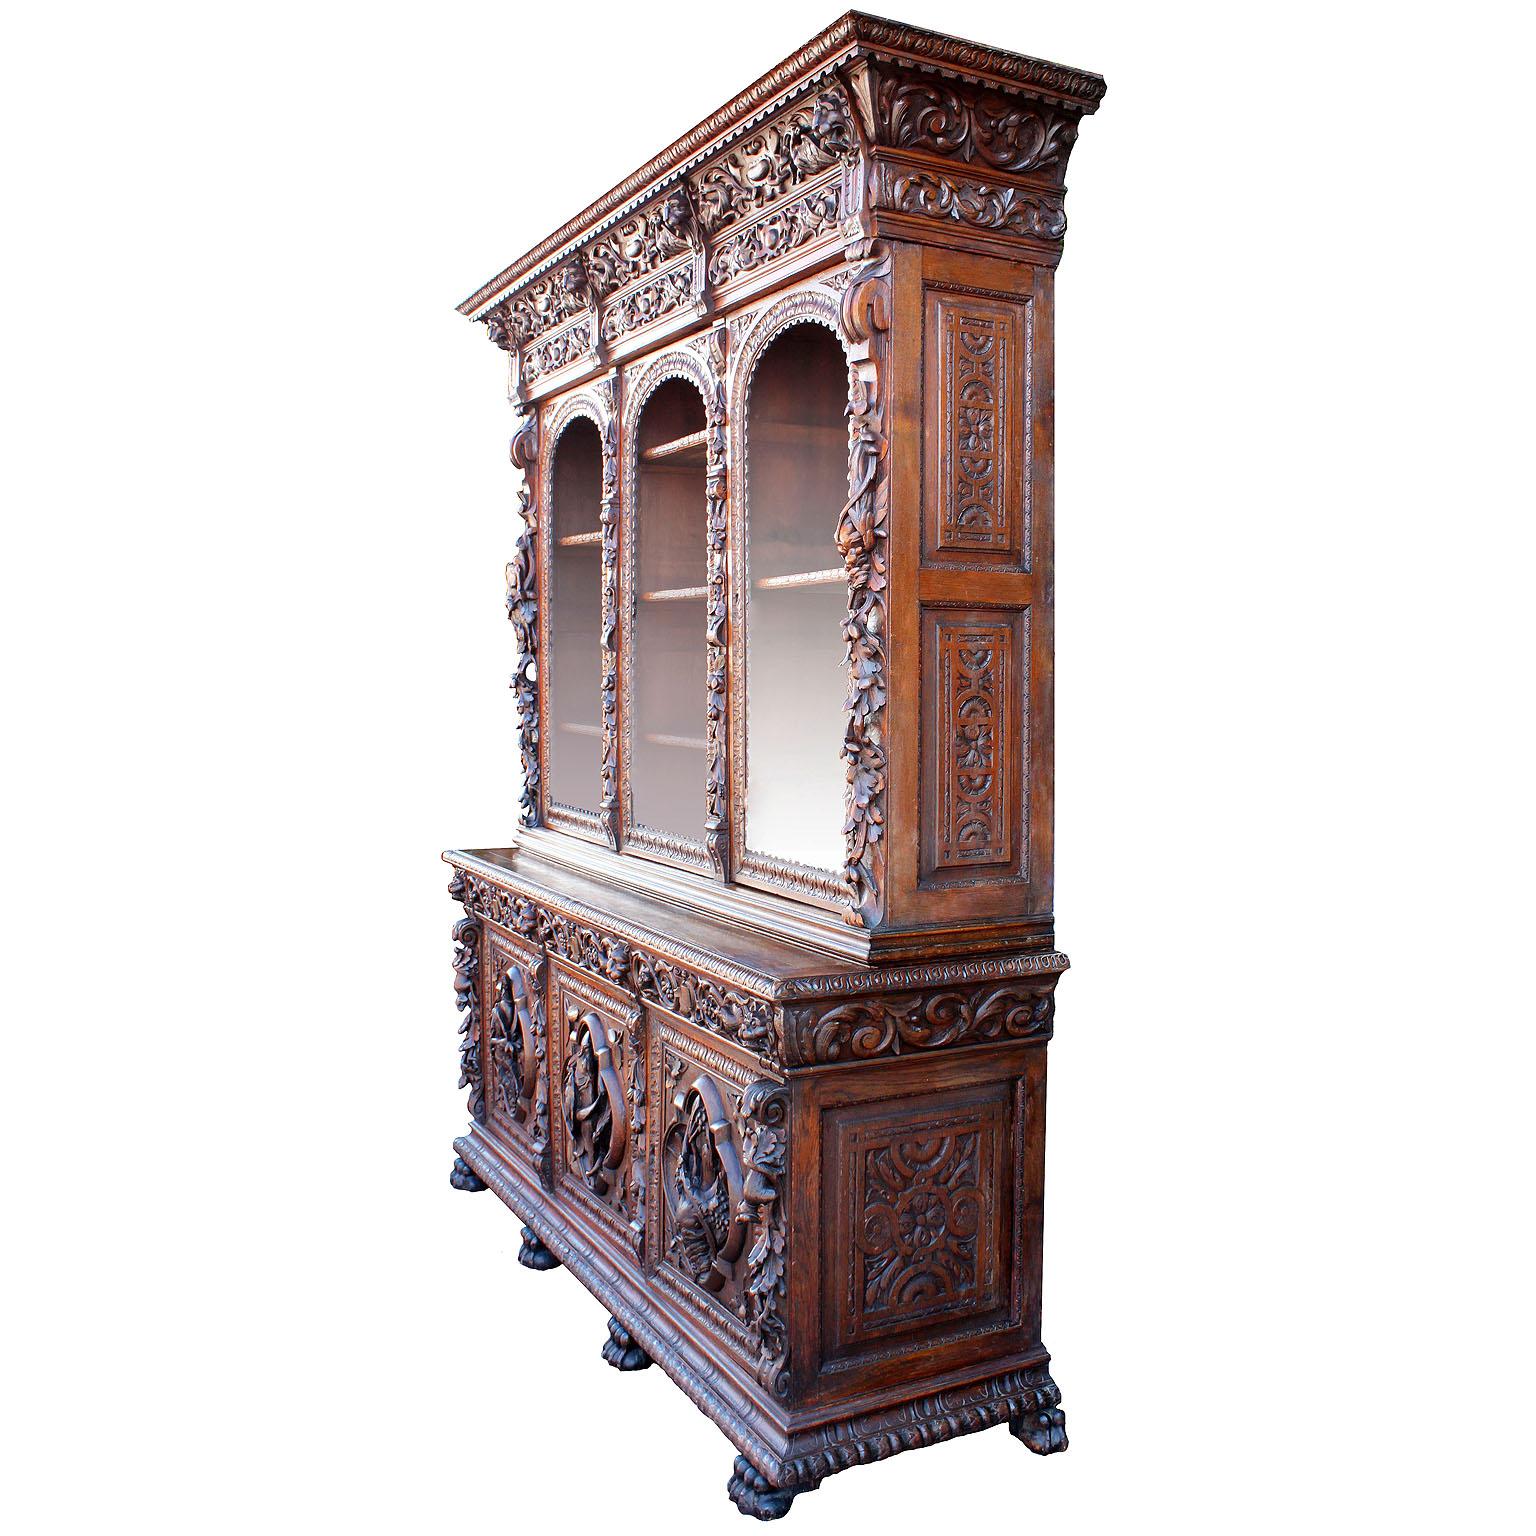 A very large and impressive Austrian-German 19th century finely carved walnut figural Black-Forest 